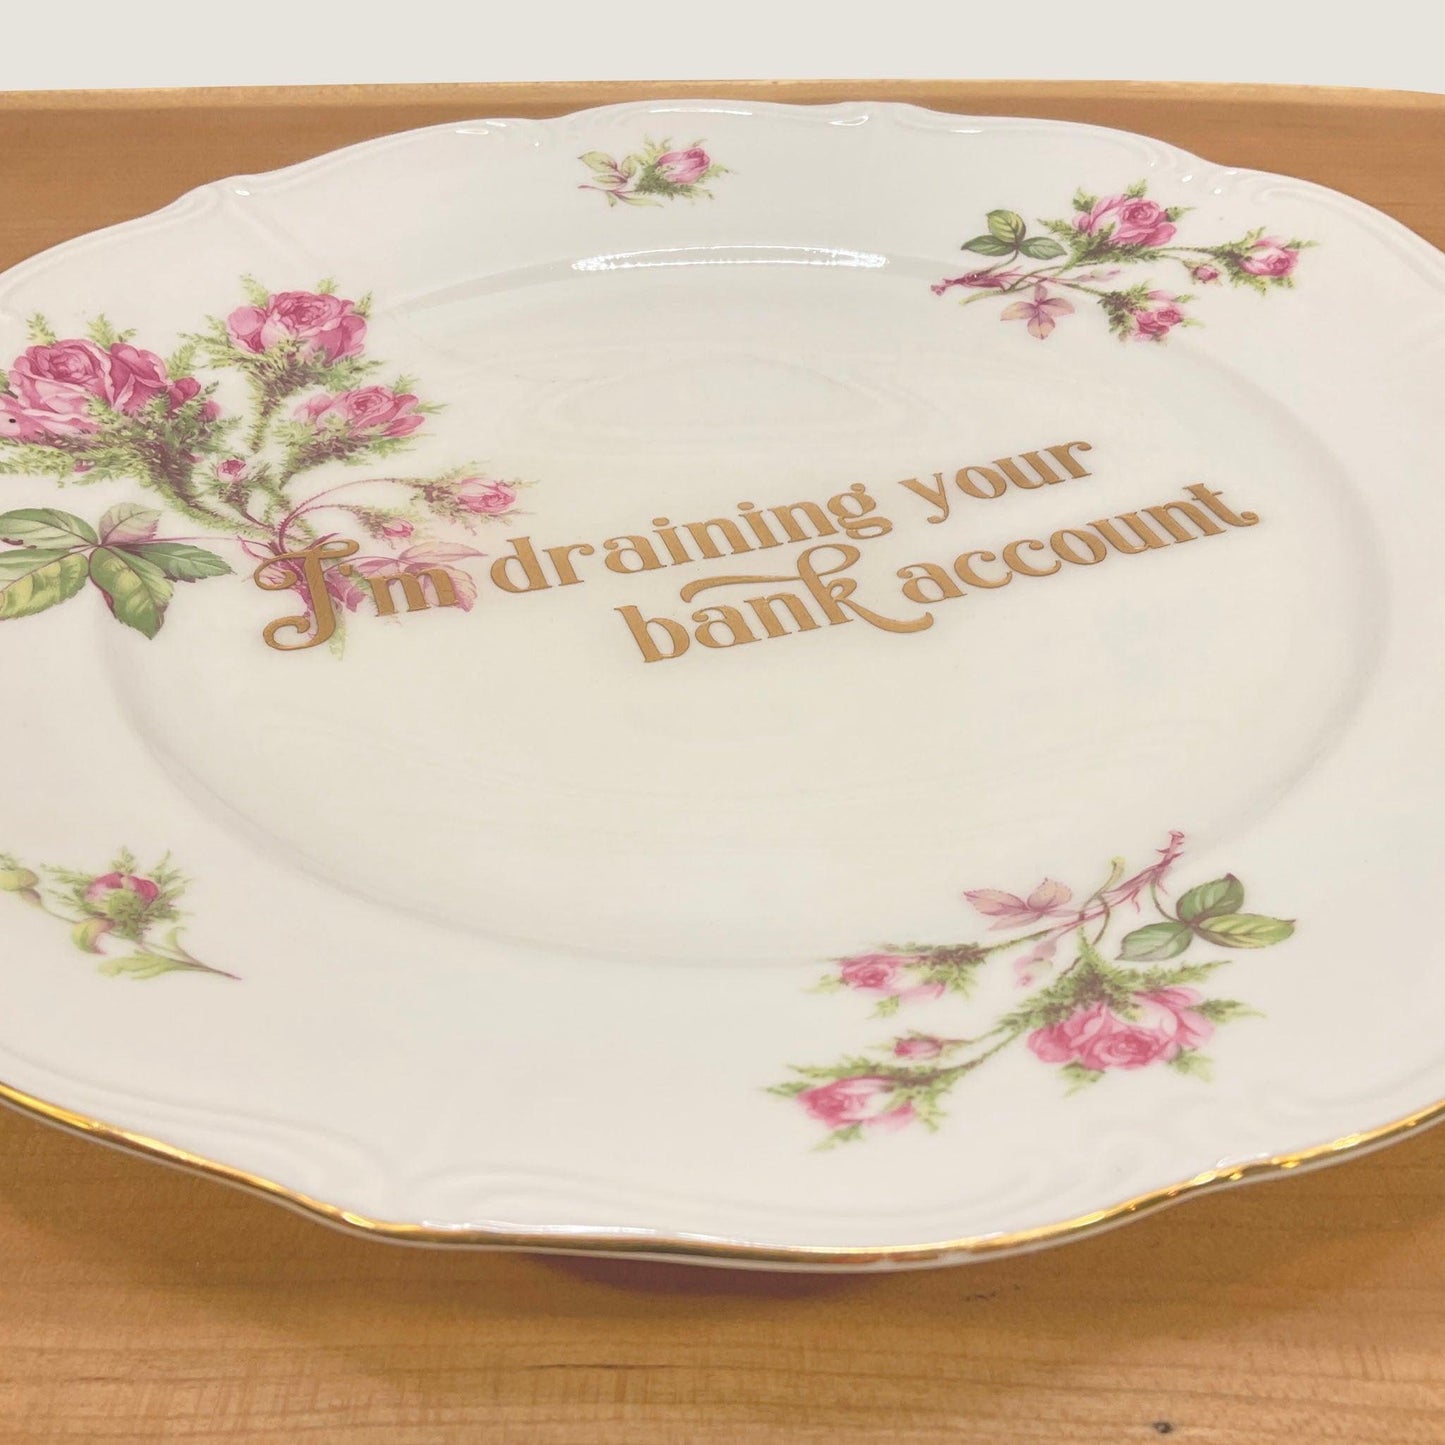 Draining Your Bank Account Dinner Plate - Offensively Domestic